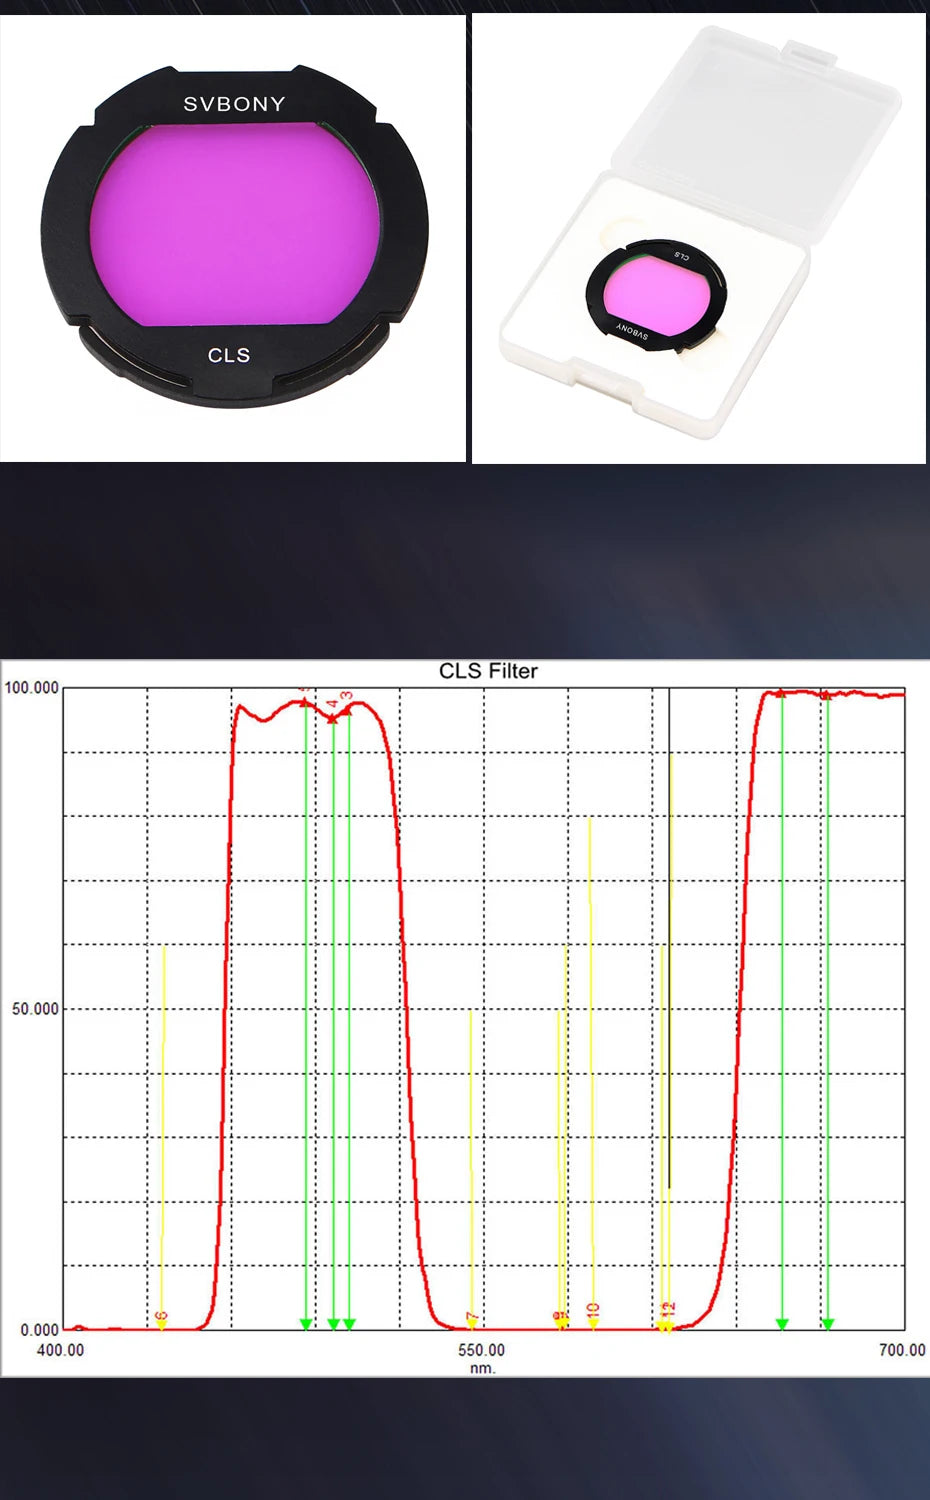 Svbony CLS Clip Filter Canon graph chart